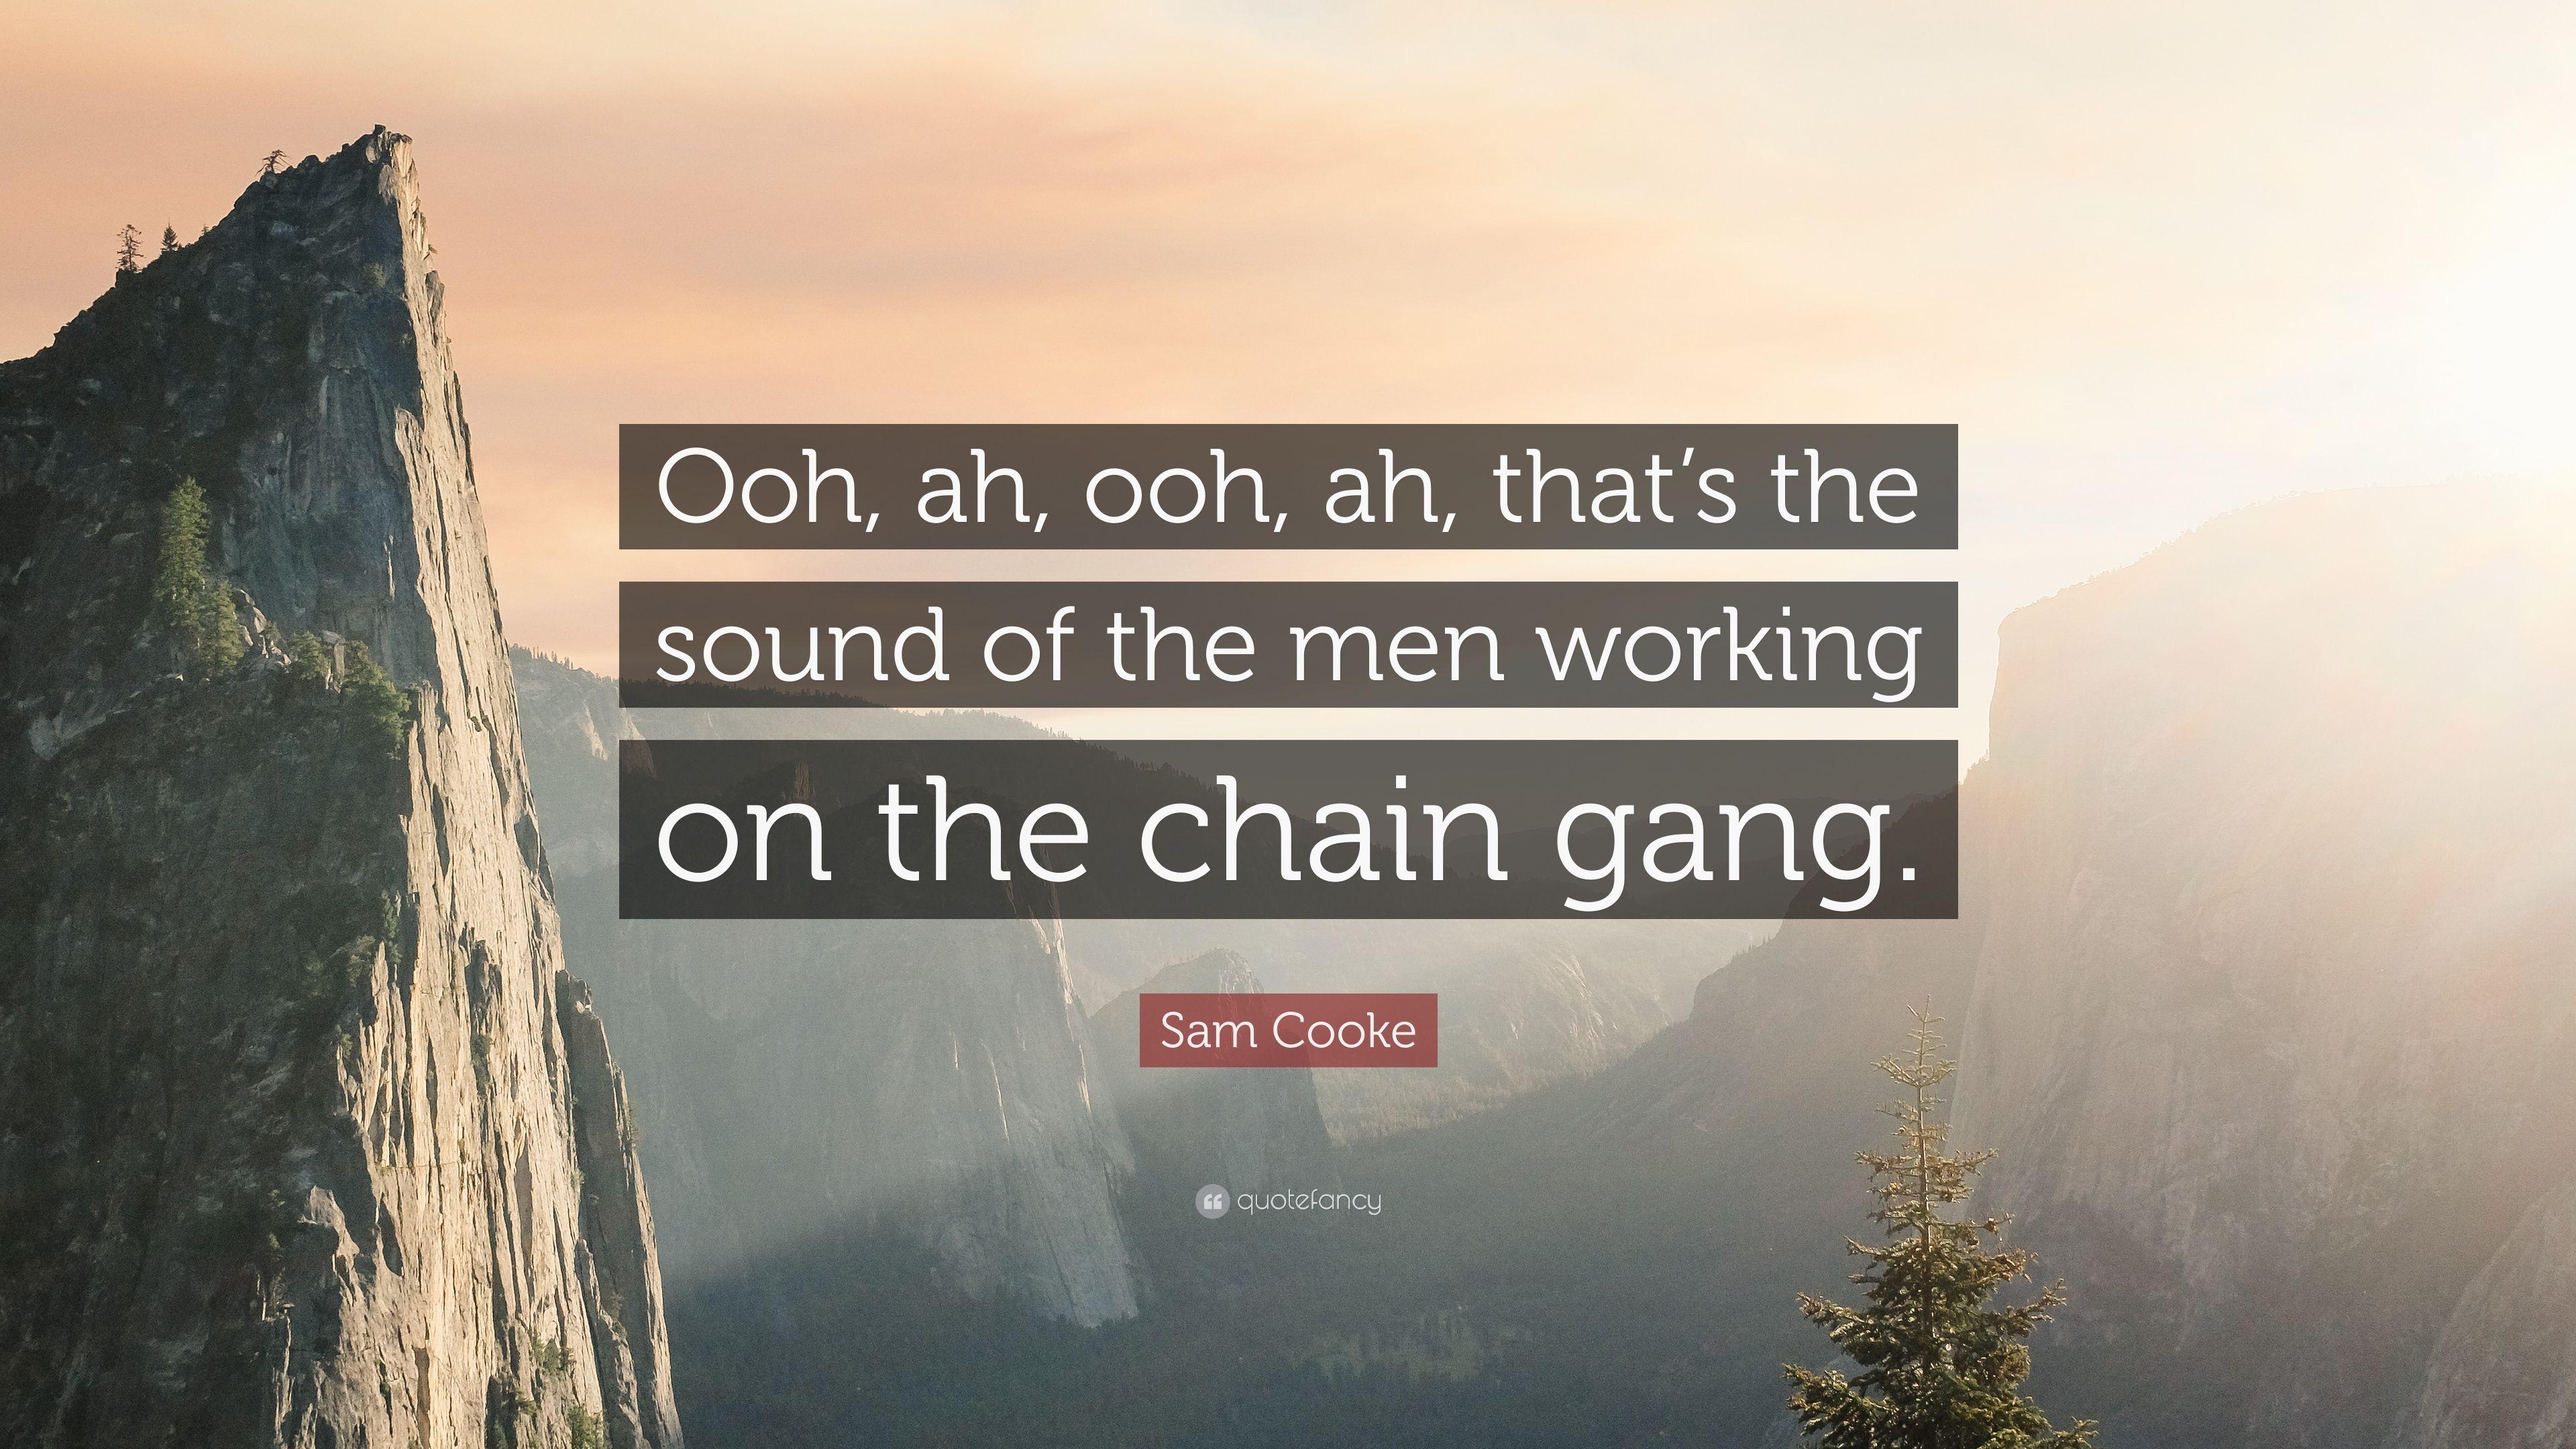 Sam Cooke Quote: “Ooh, ah, ooh, ah, that's the sound of the men